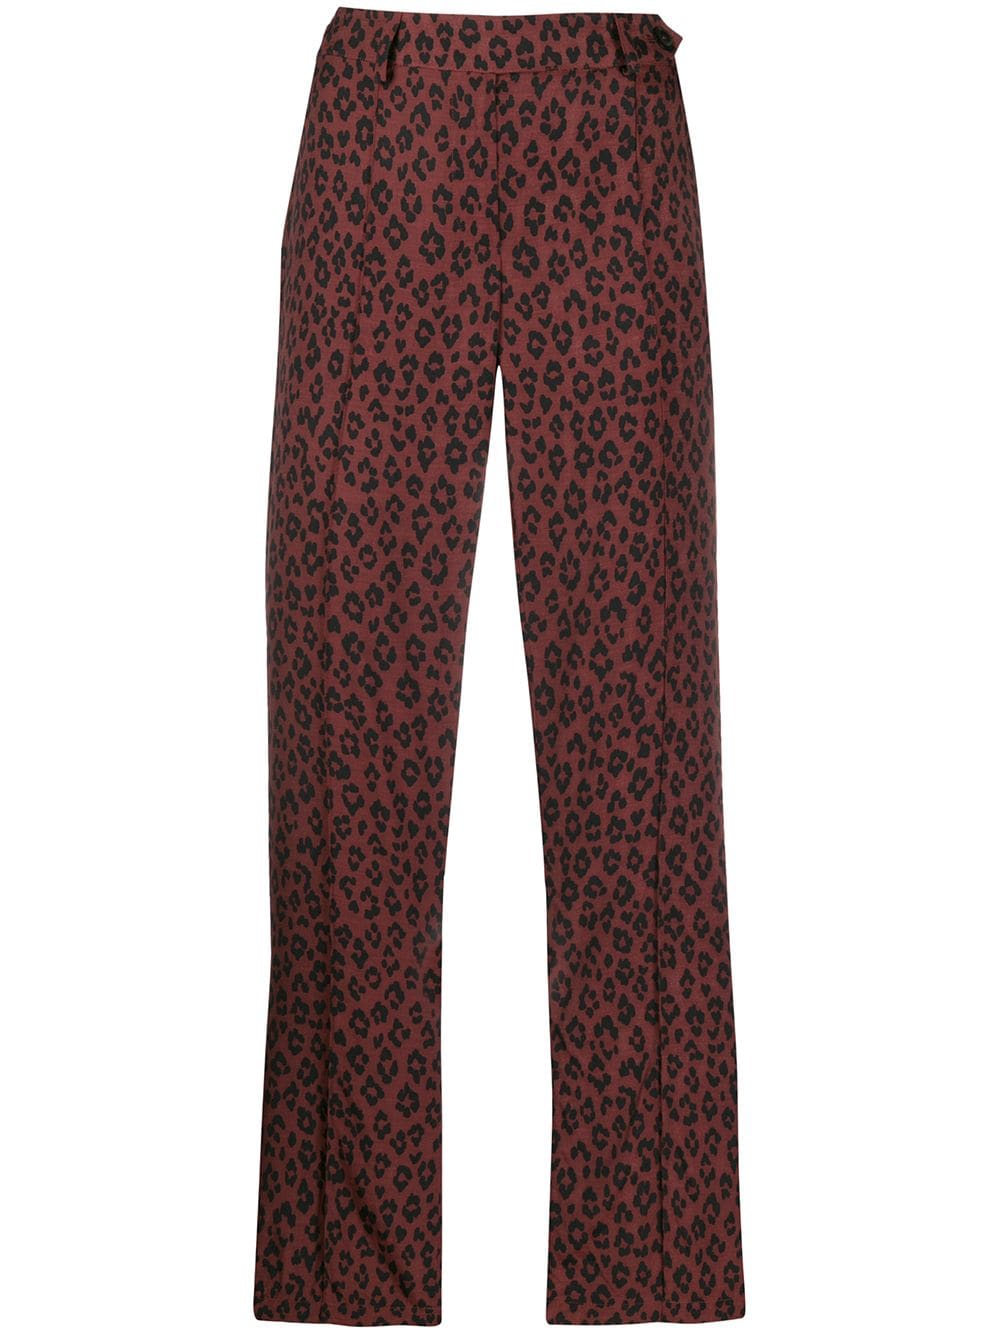 Image 1 of A.P.C. cropped leopard print trousers